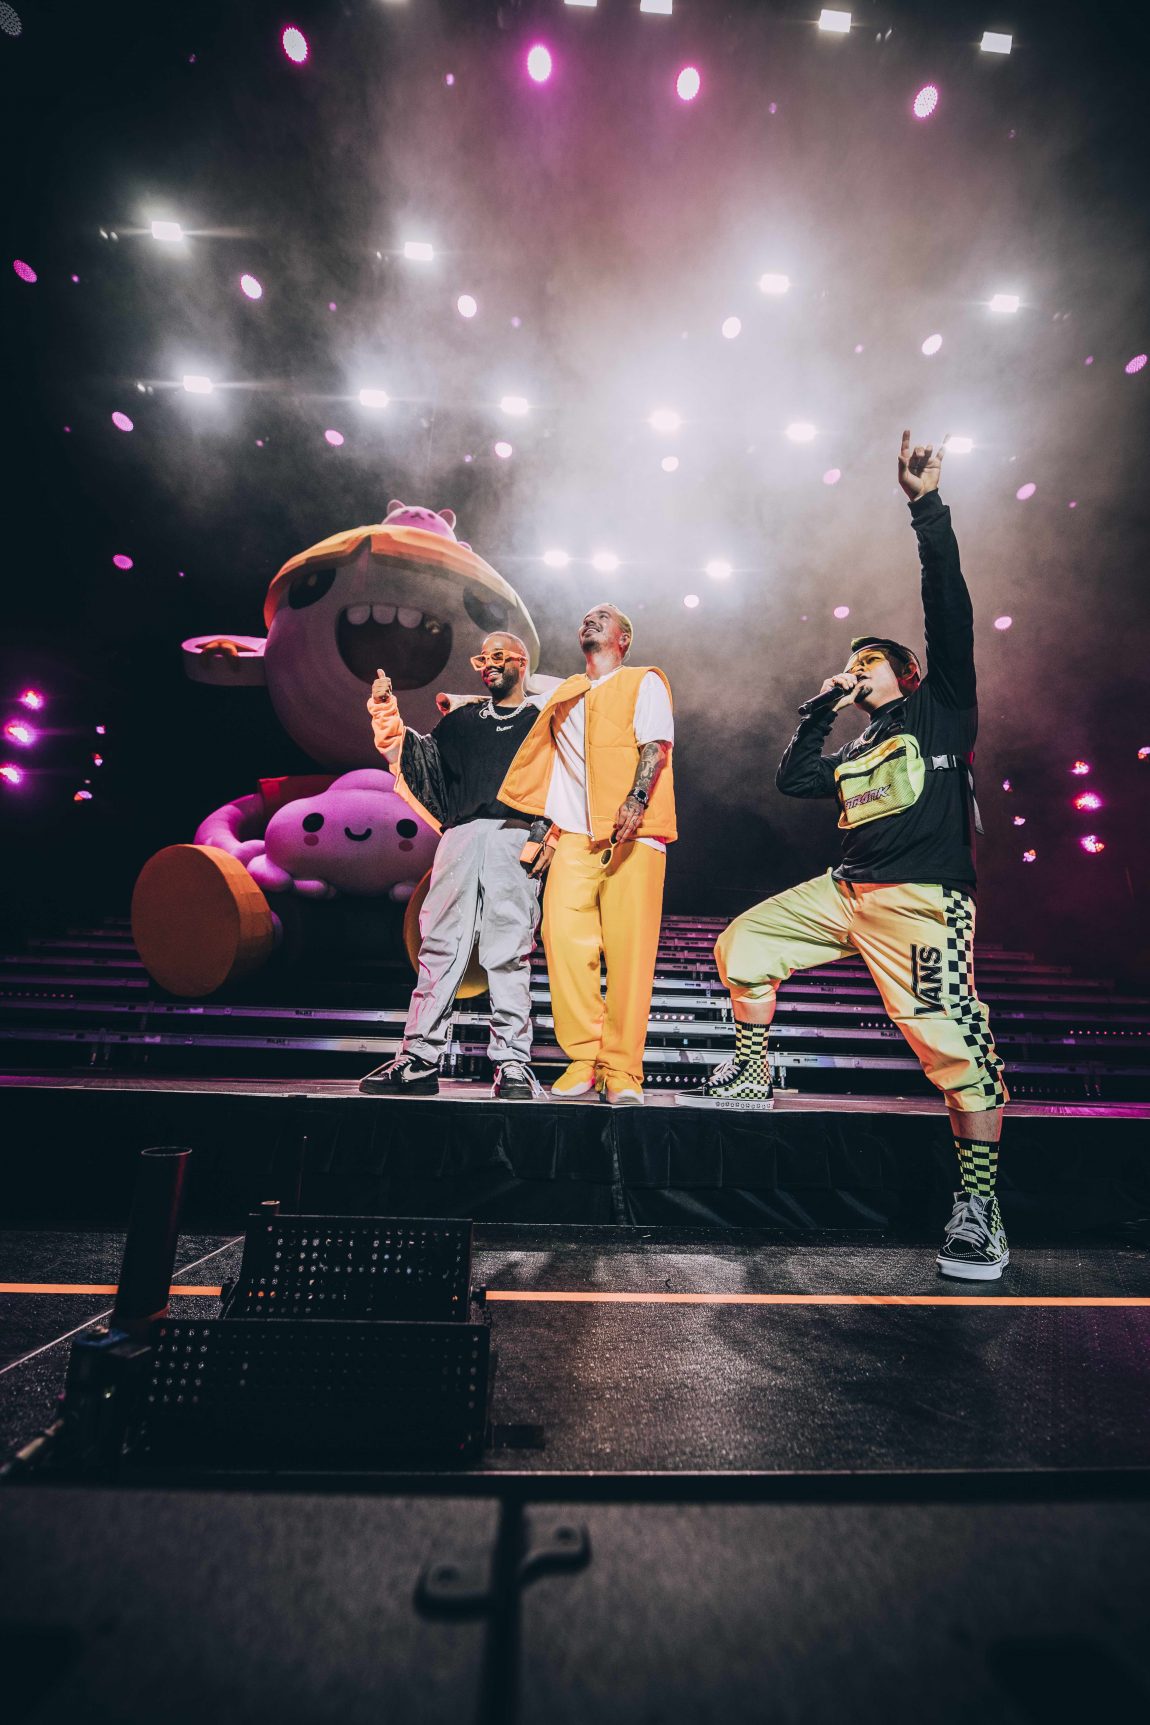 J Balvin's Breaks Records in Puerto Rico With His Stunning 'Arcoiris' Tour